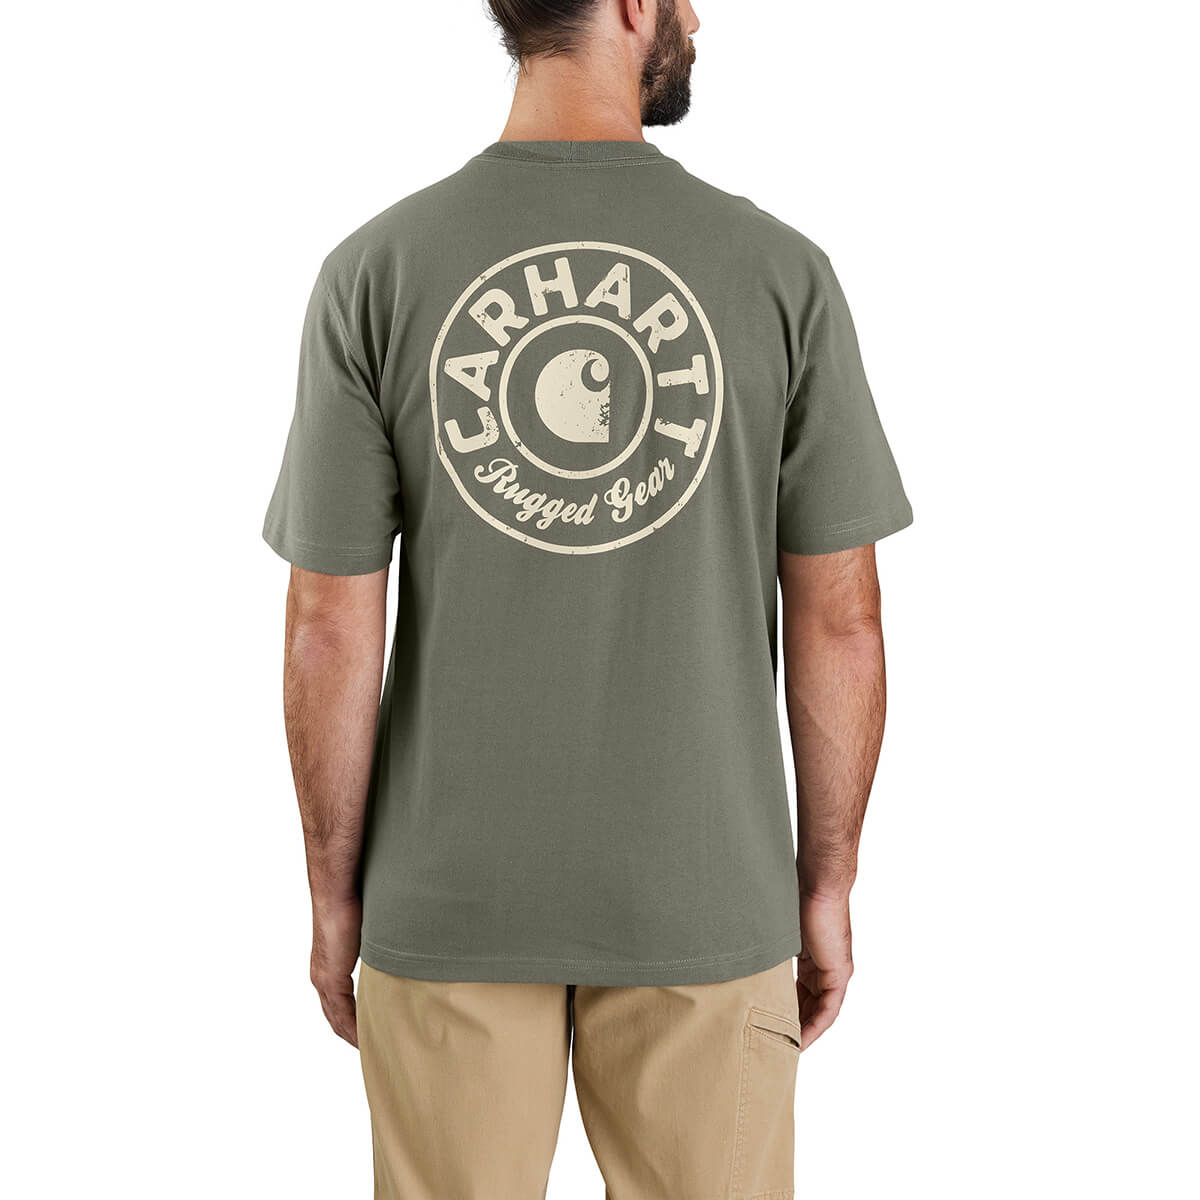 106154 - Carhartt Loose Fit Heavyweight Short-Sleeve Built to Last Graphic T-Shirt